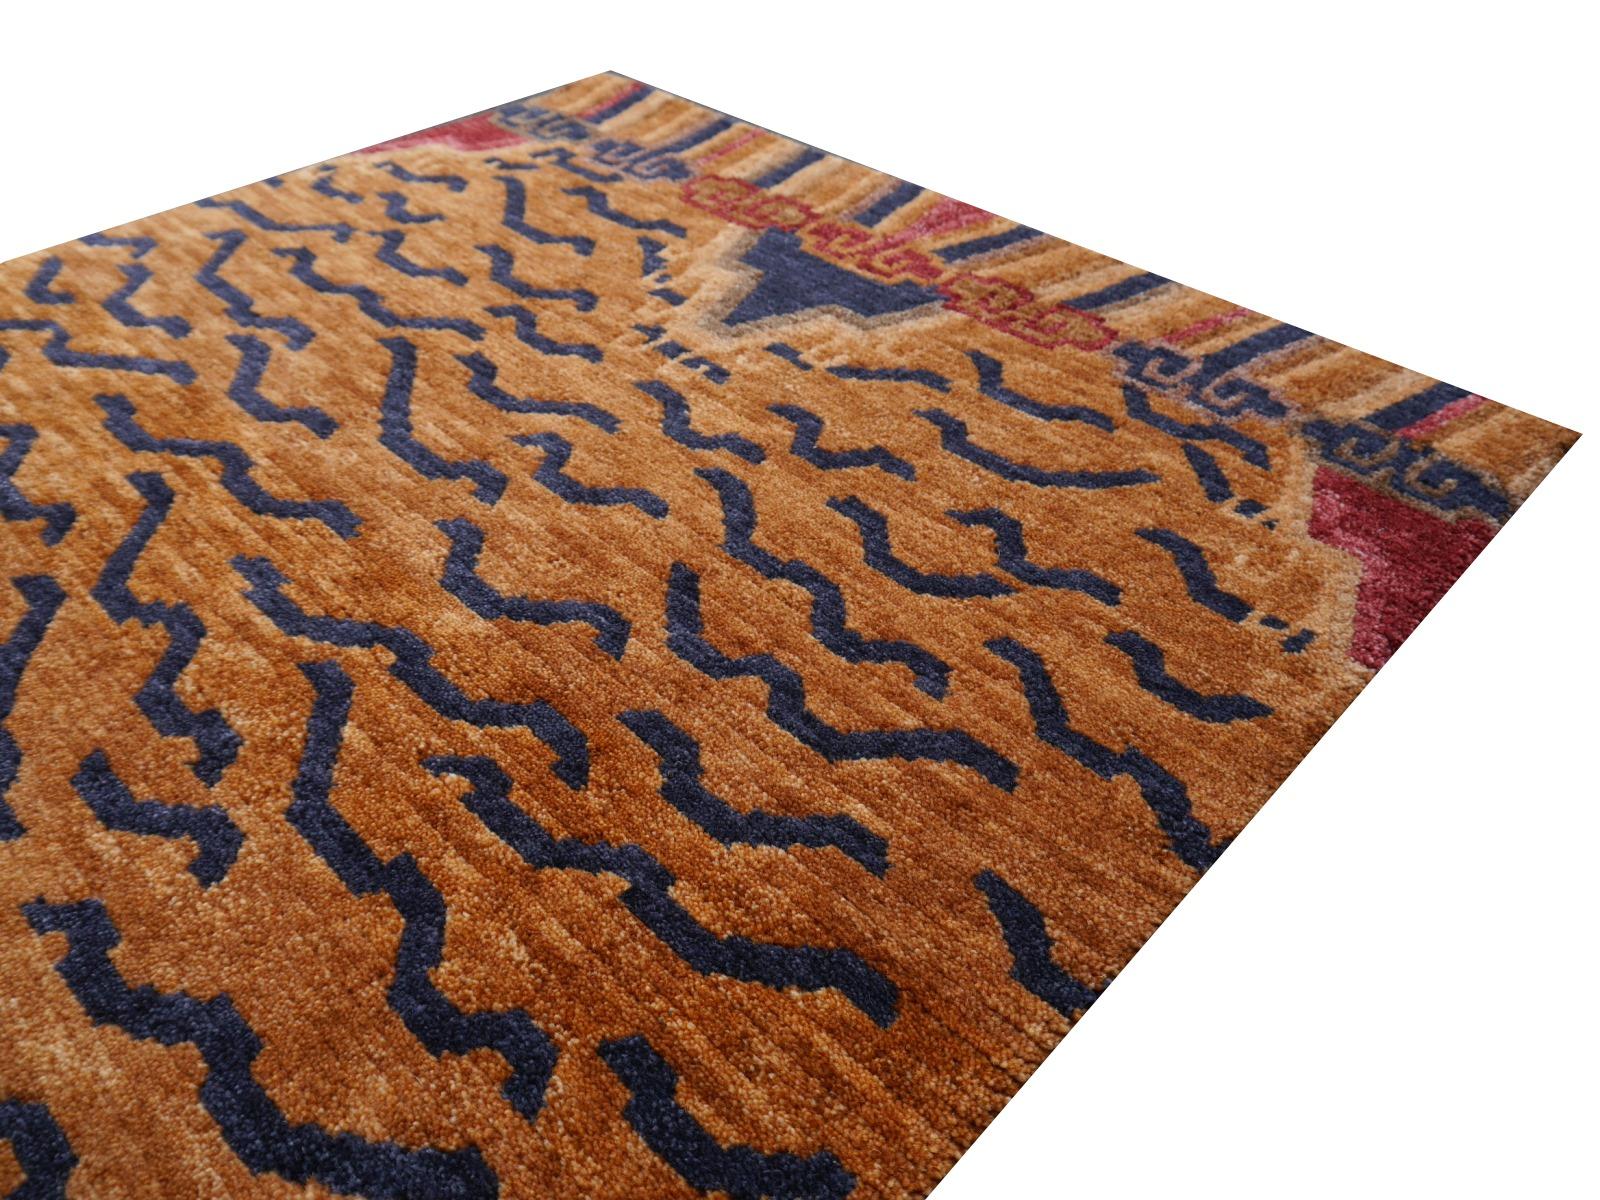 Tibetan Tiger Rug Pure Wool Hand Knotted by Djoharian Collection Antique Design 2